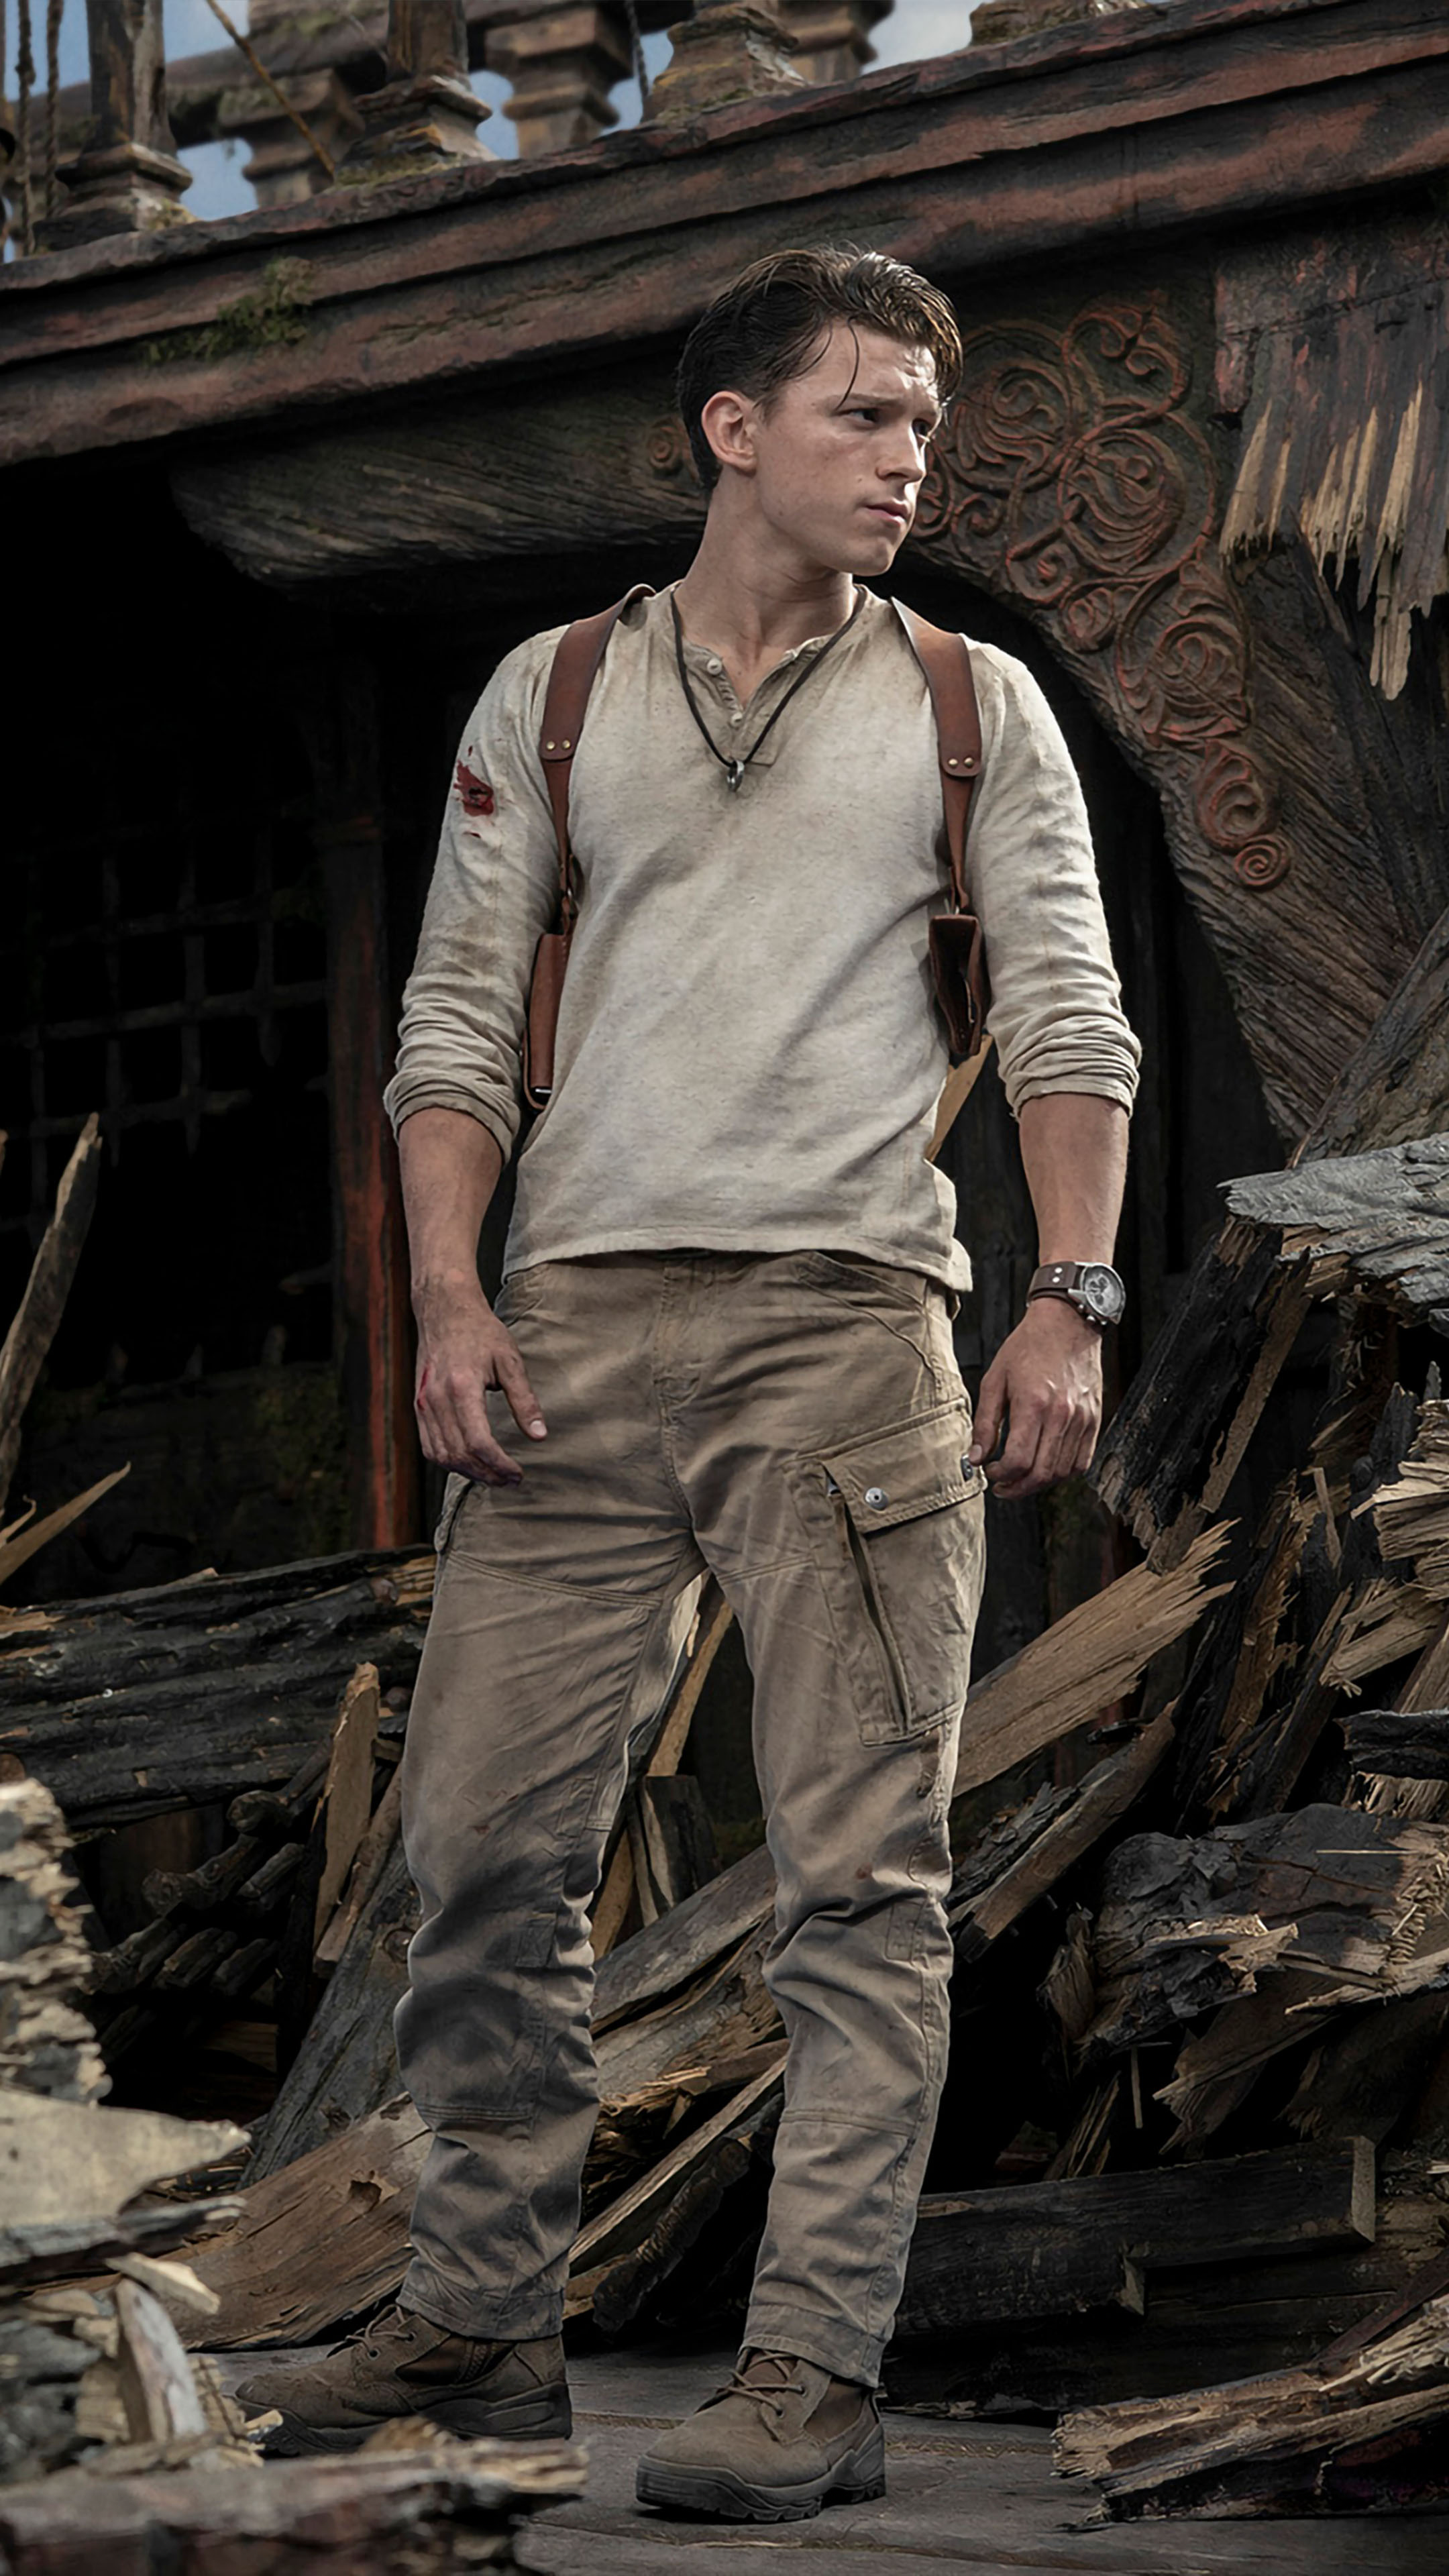 Tom Holland As Nathan Drake In Uncharted 2021 4K Ultra HD Mobile Wallpaper